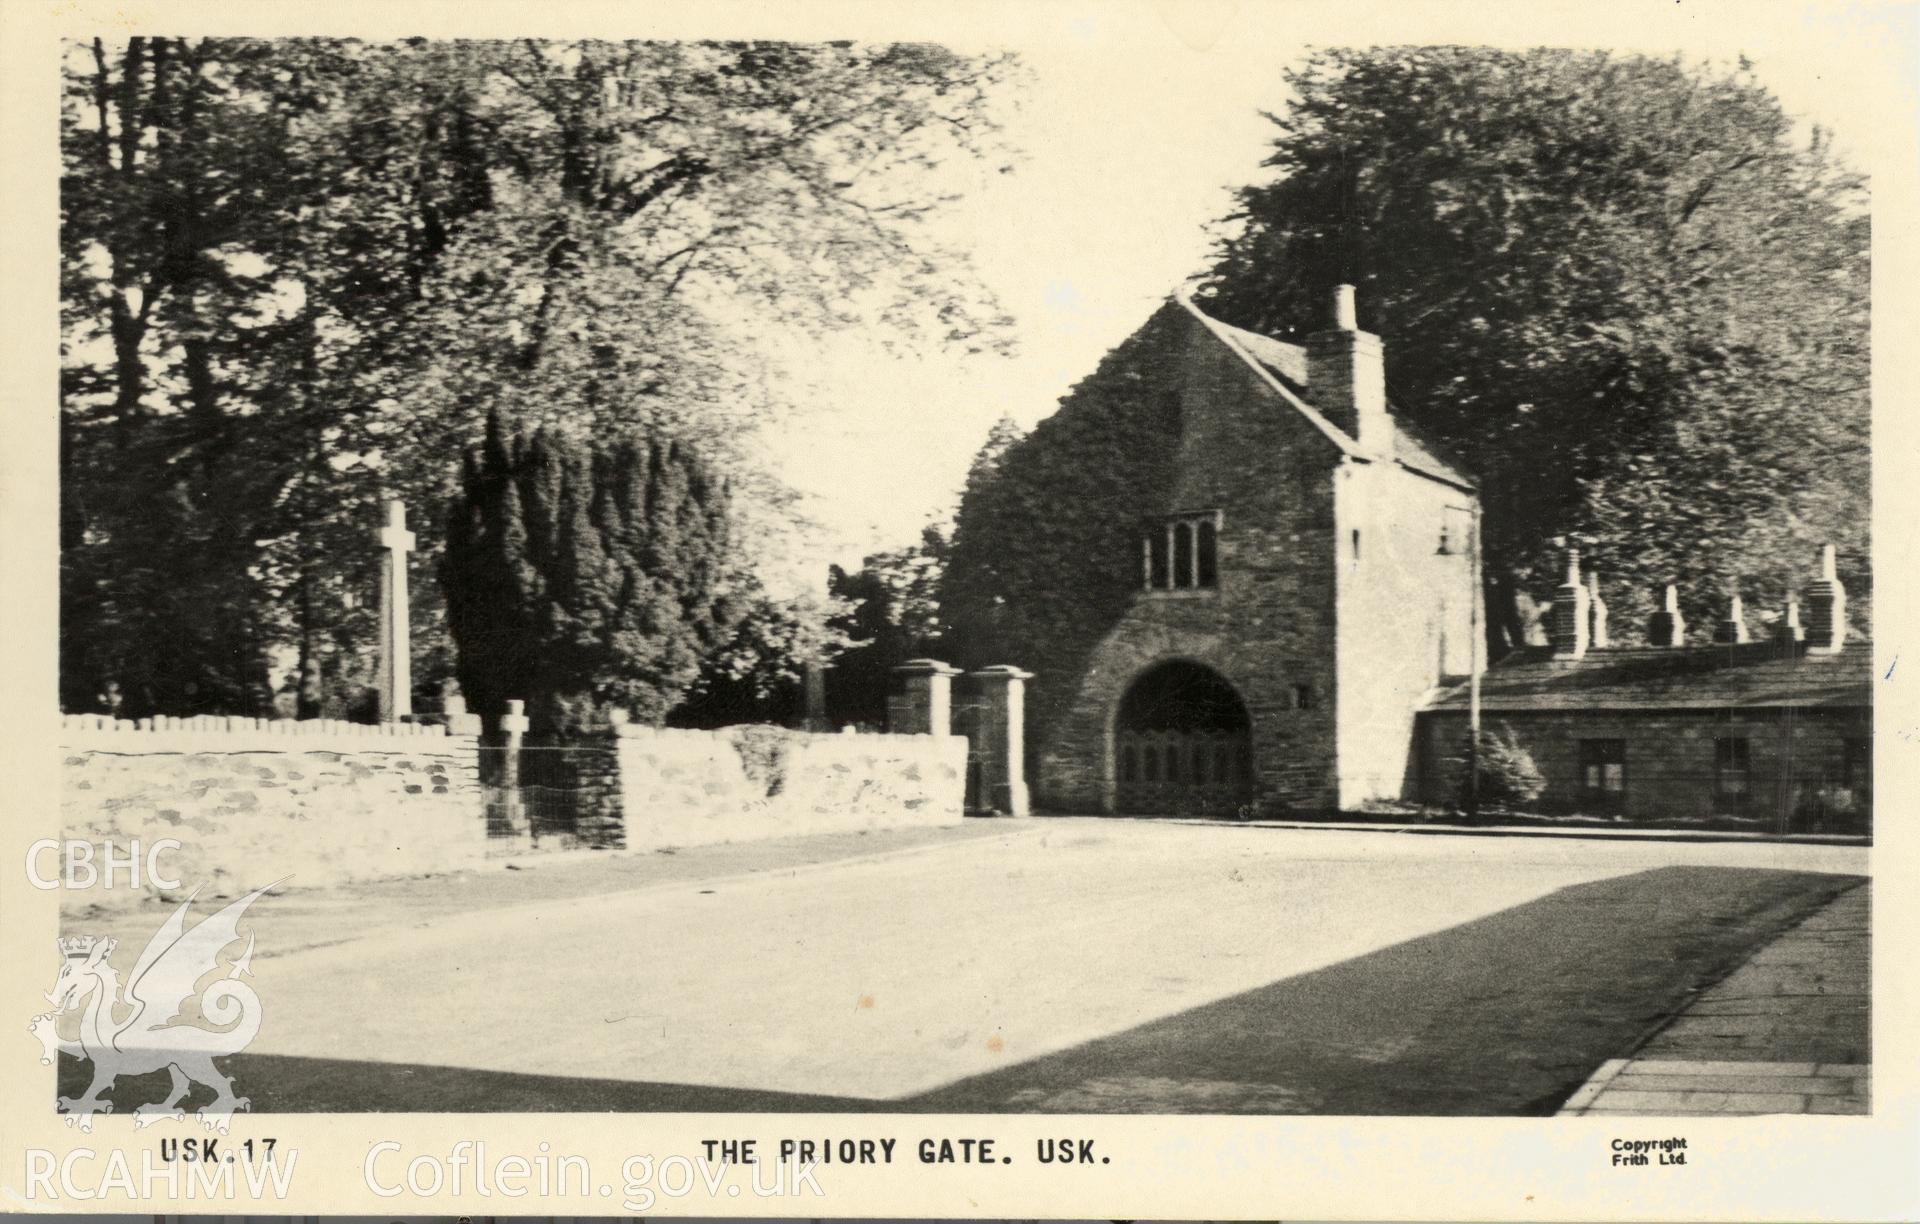 Digitised postcard image of the Priory Gatehouse, Usk, F. Frith & Co., Ltd. Produced by Parks and Gardens Data Services, from an original item in the Peter Davis Collection at Parks and Gardens UK. We hold only web-resolution images of this collection, suitable for viewing on screen and for research purposes only. We do not hold the original images, or publication quality scans.